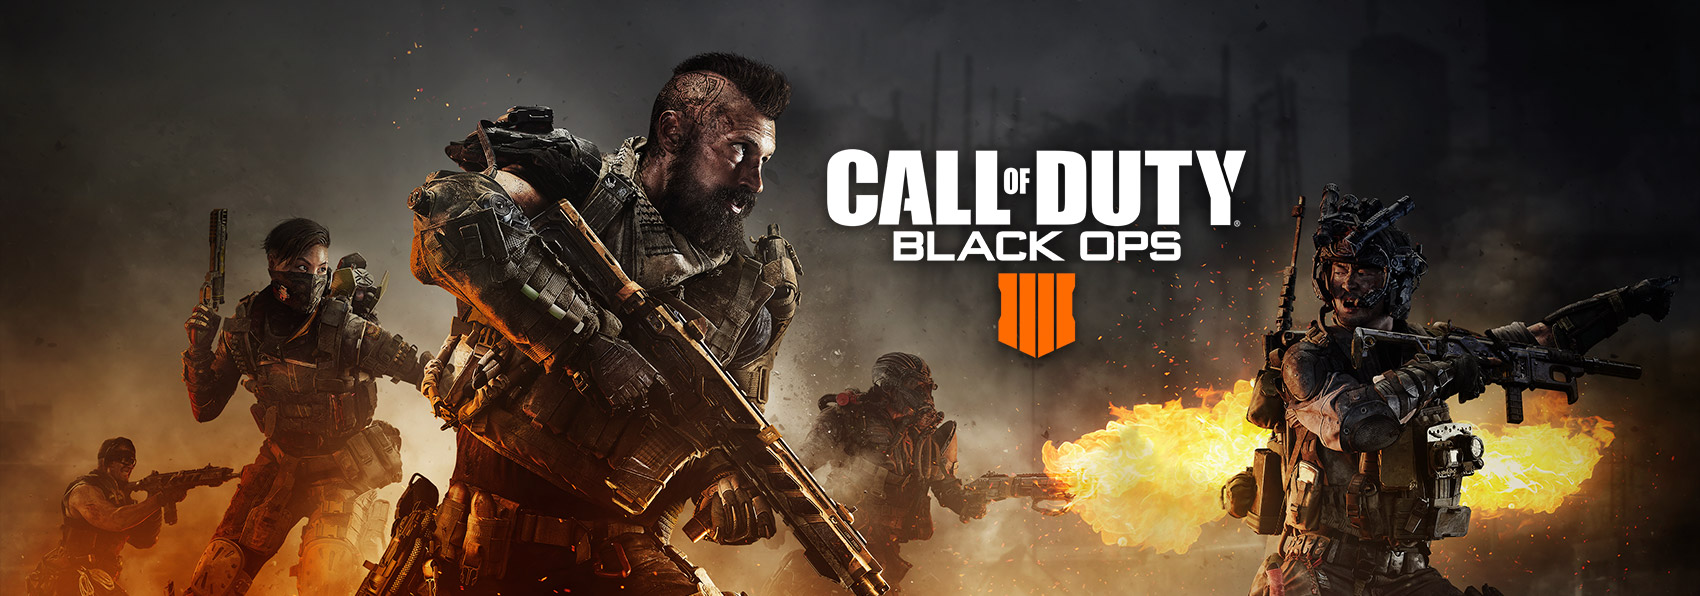 Treyarch Released Call of Duty Black Ops 4 Wallpaper